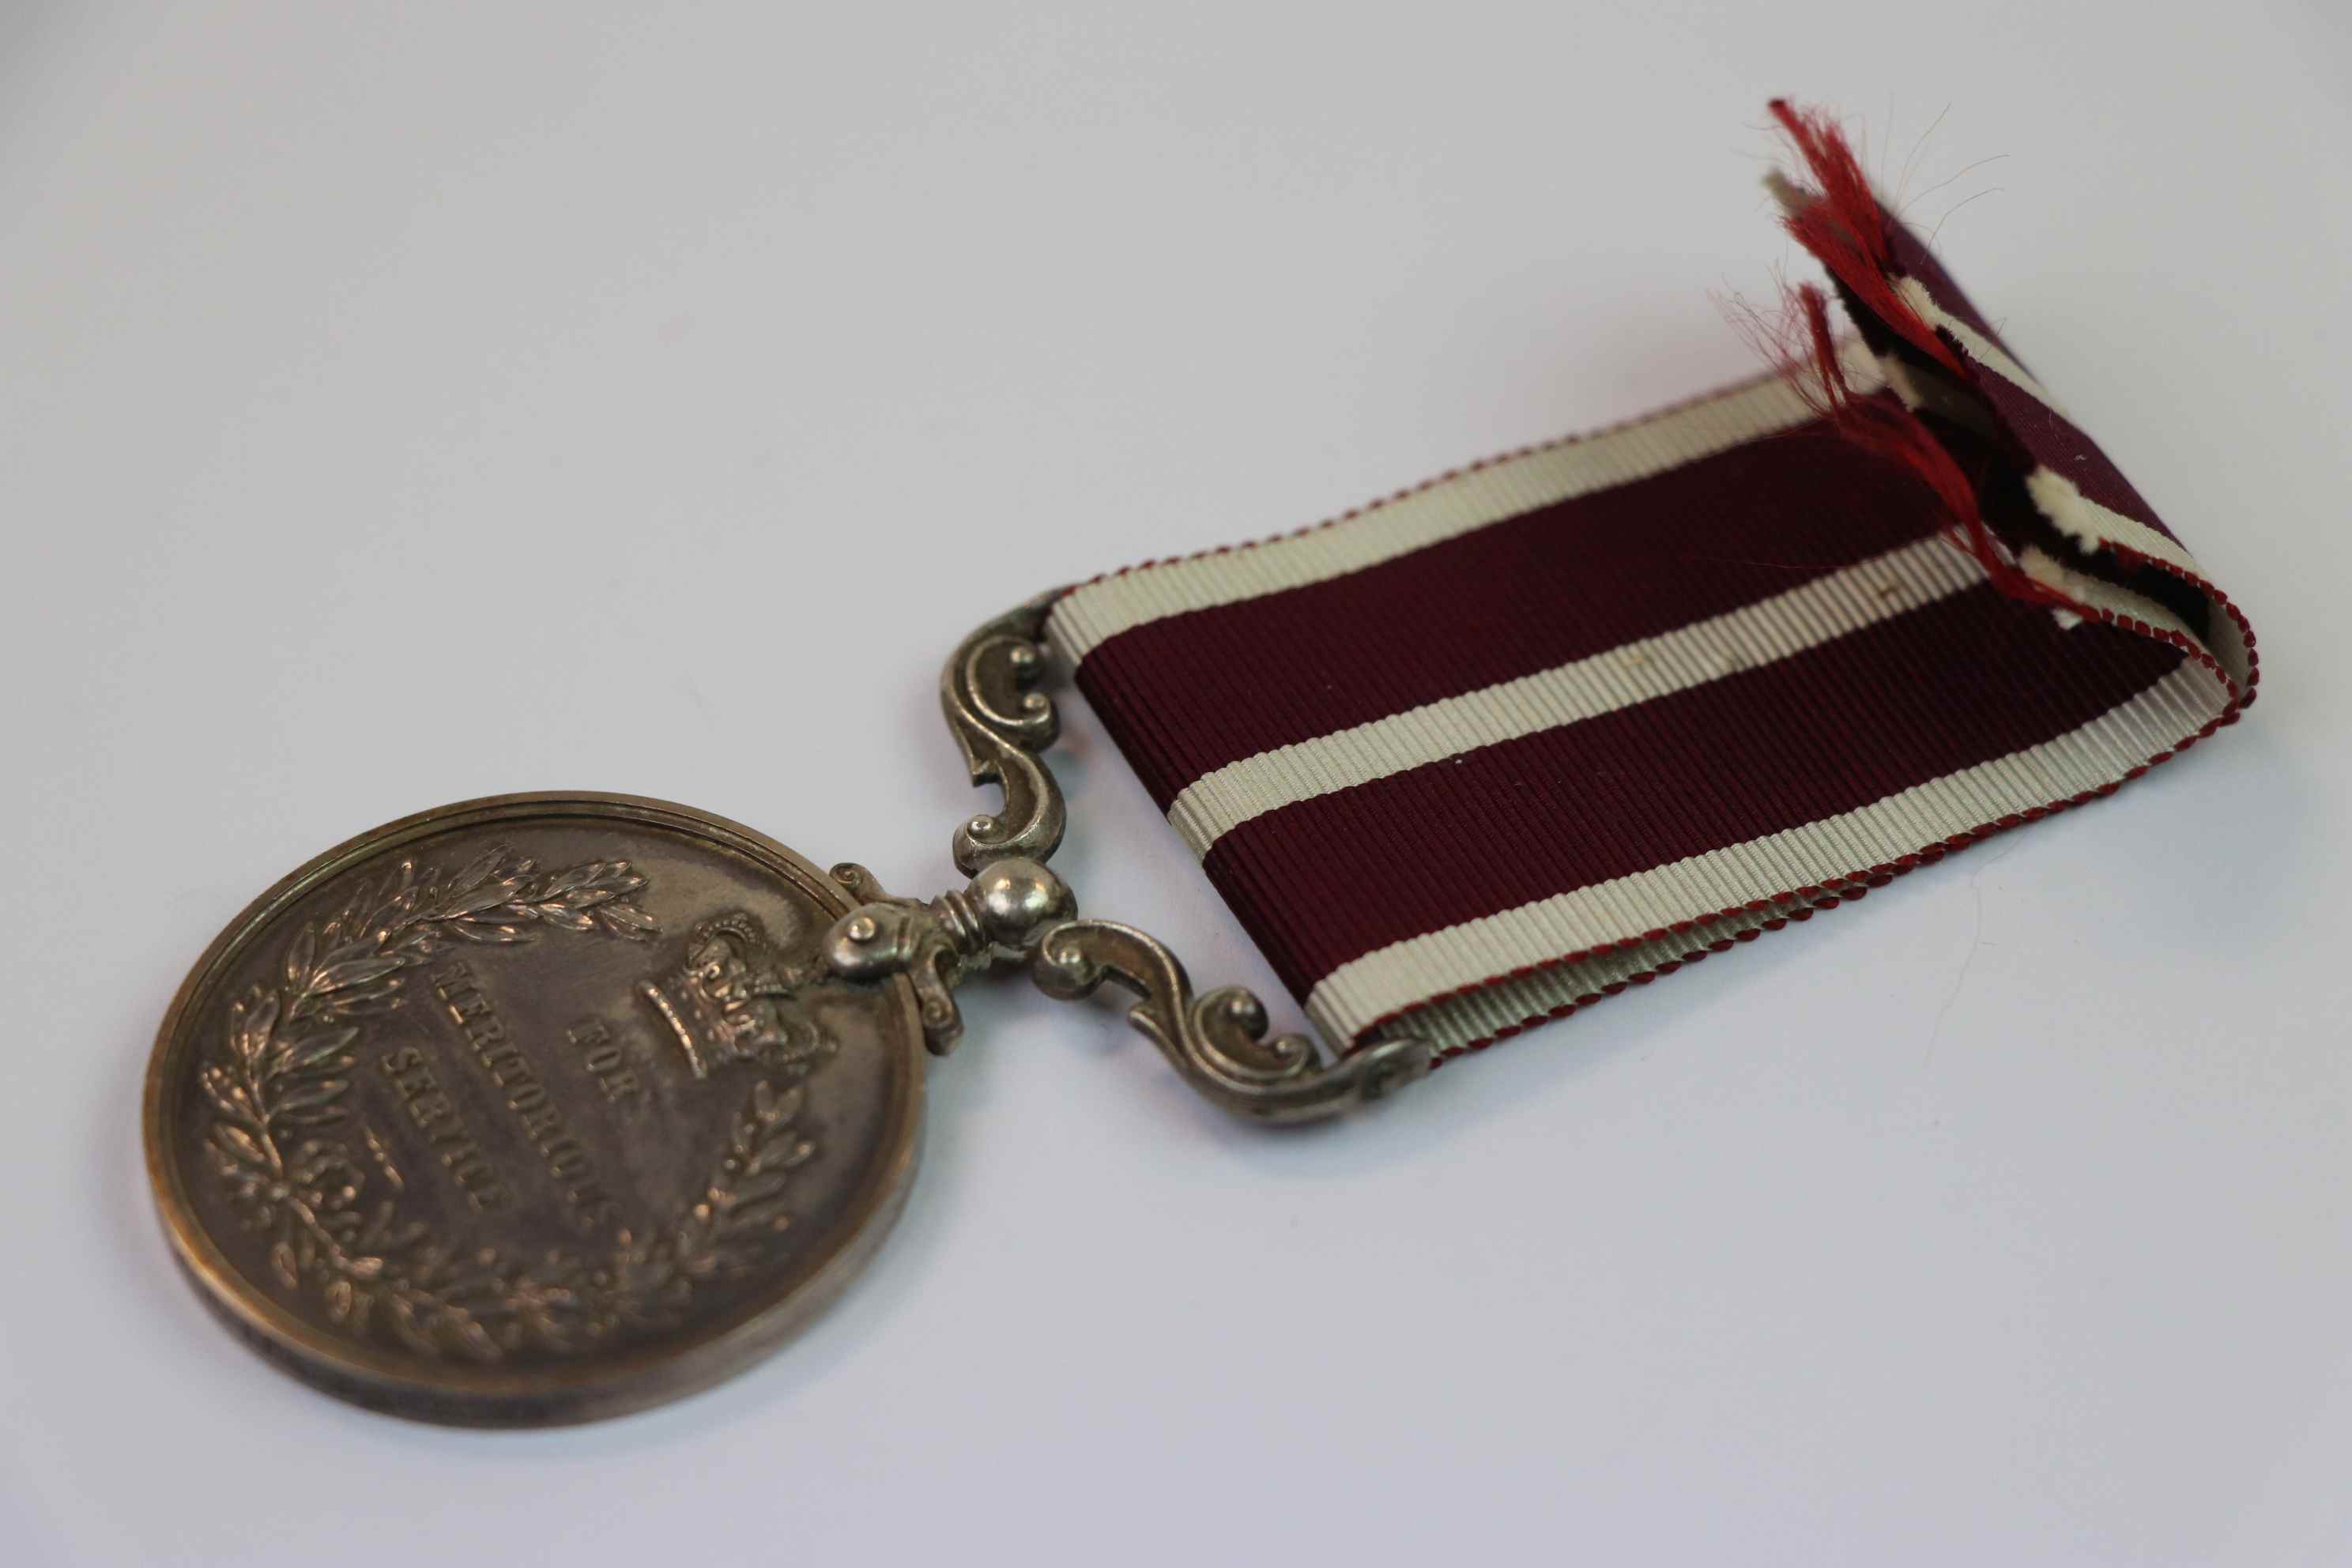 A Full Size King George VI British Army Meritorious Service Medal Issued To 4523853 SJT. J.W. ORAM - Image 9 of 11